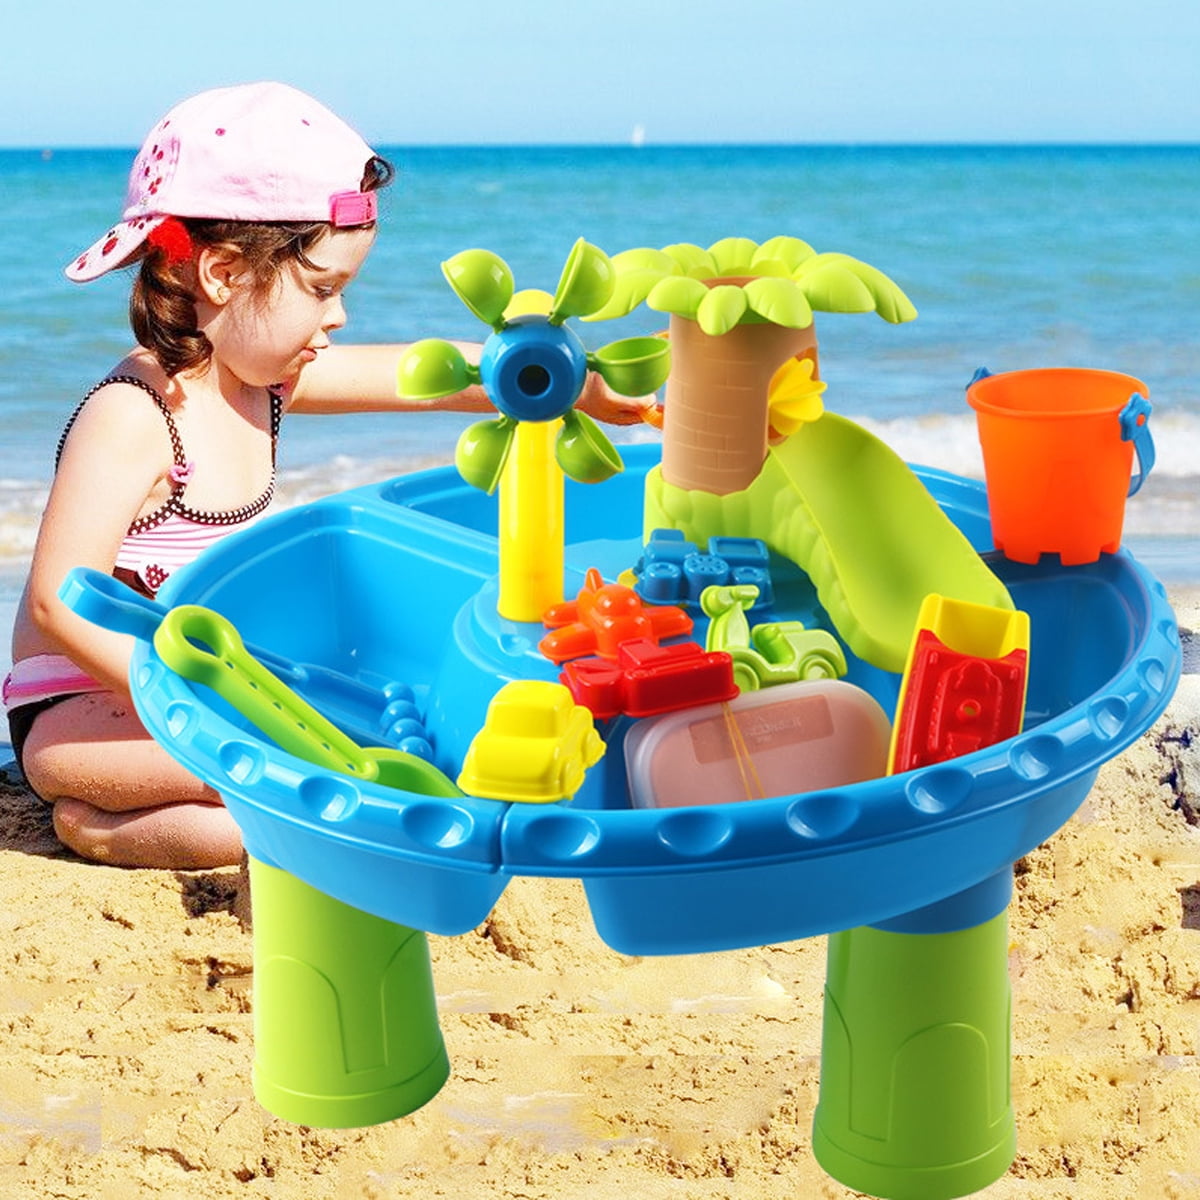 Small Blue Pirate Bucket & Tool Set Seaside Holiday Beach Sand Pit/Table Garden 